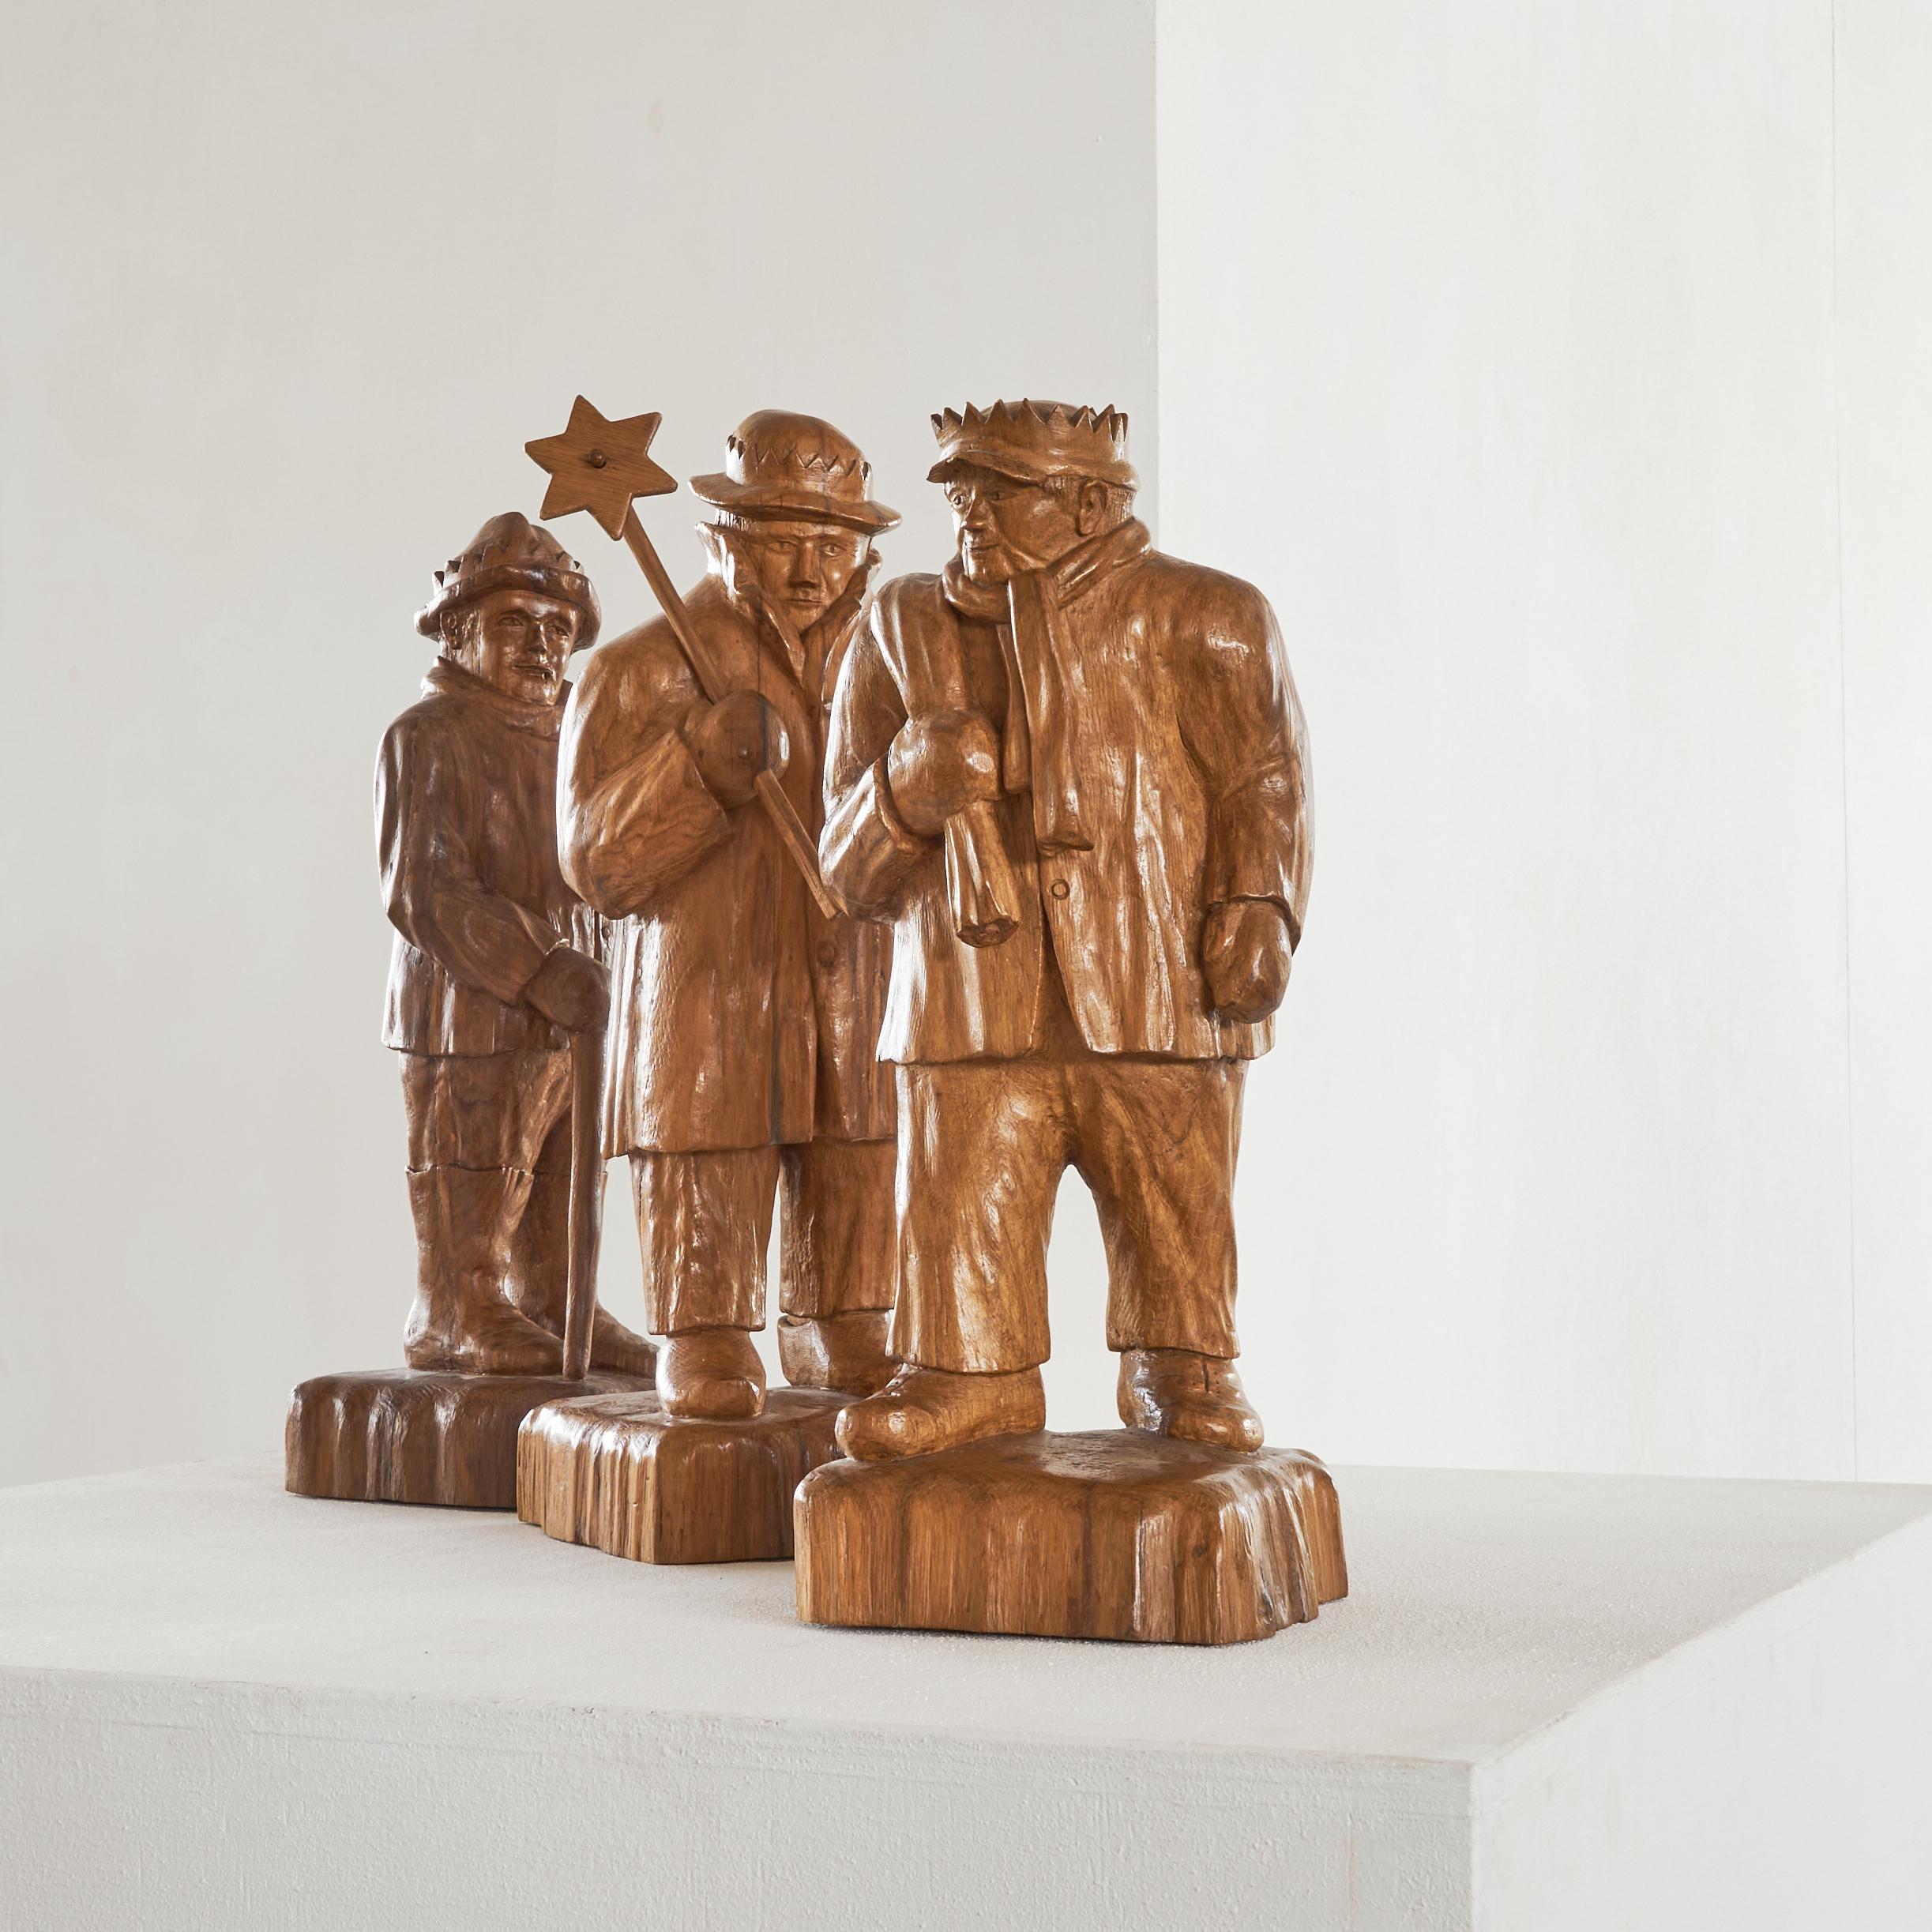 Felix Timmermans 'Three Wise Men' Flemish Folk Art Sculptures in Wood, Belgium, 1970 and 1972.

This is a remarkable set of Flemish folk art sculptures carved out of wood in 1970 and 1972. Based on a famous folkloristic Flemish story by Felix